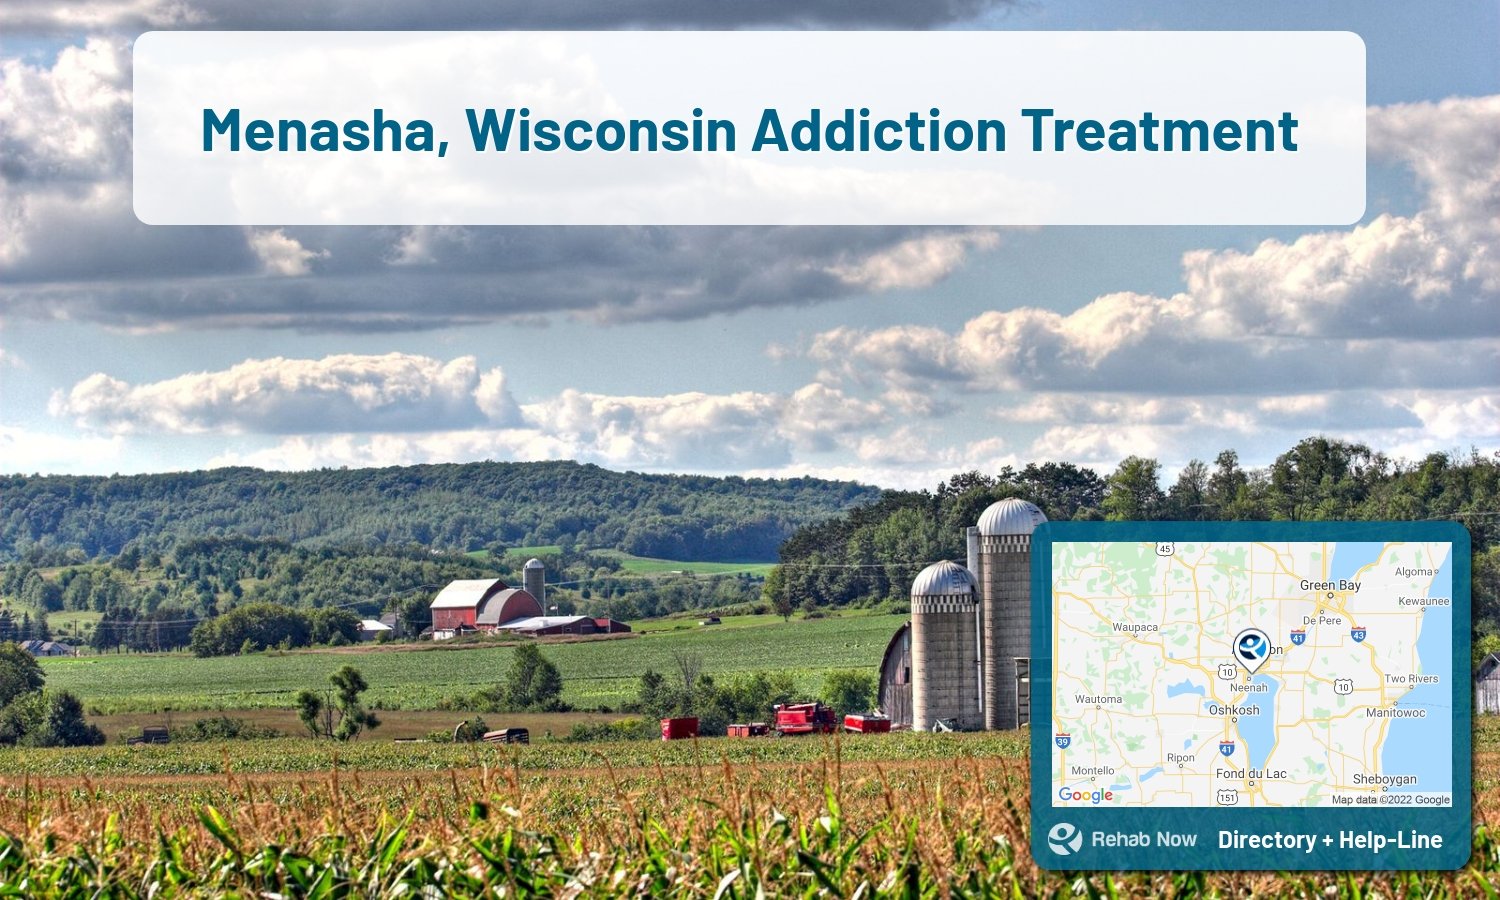 List of alcohol and drug treatment centers near you in Menasha, Wisconsin. Research certifications, programs, methods, pricing, and more.